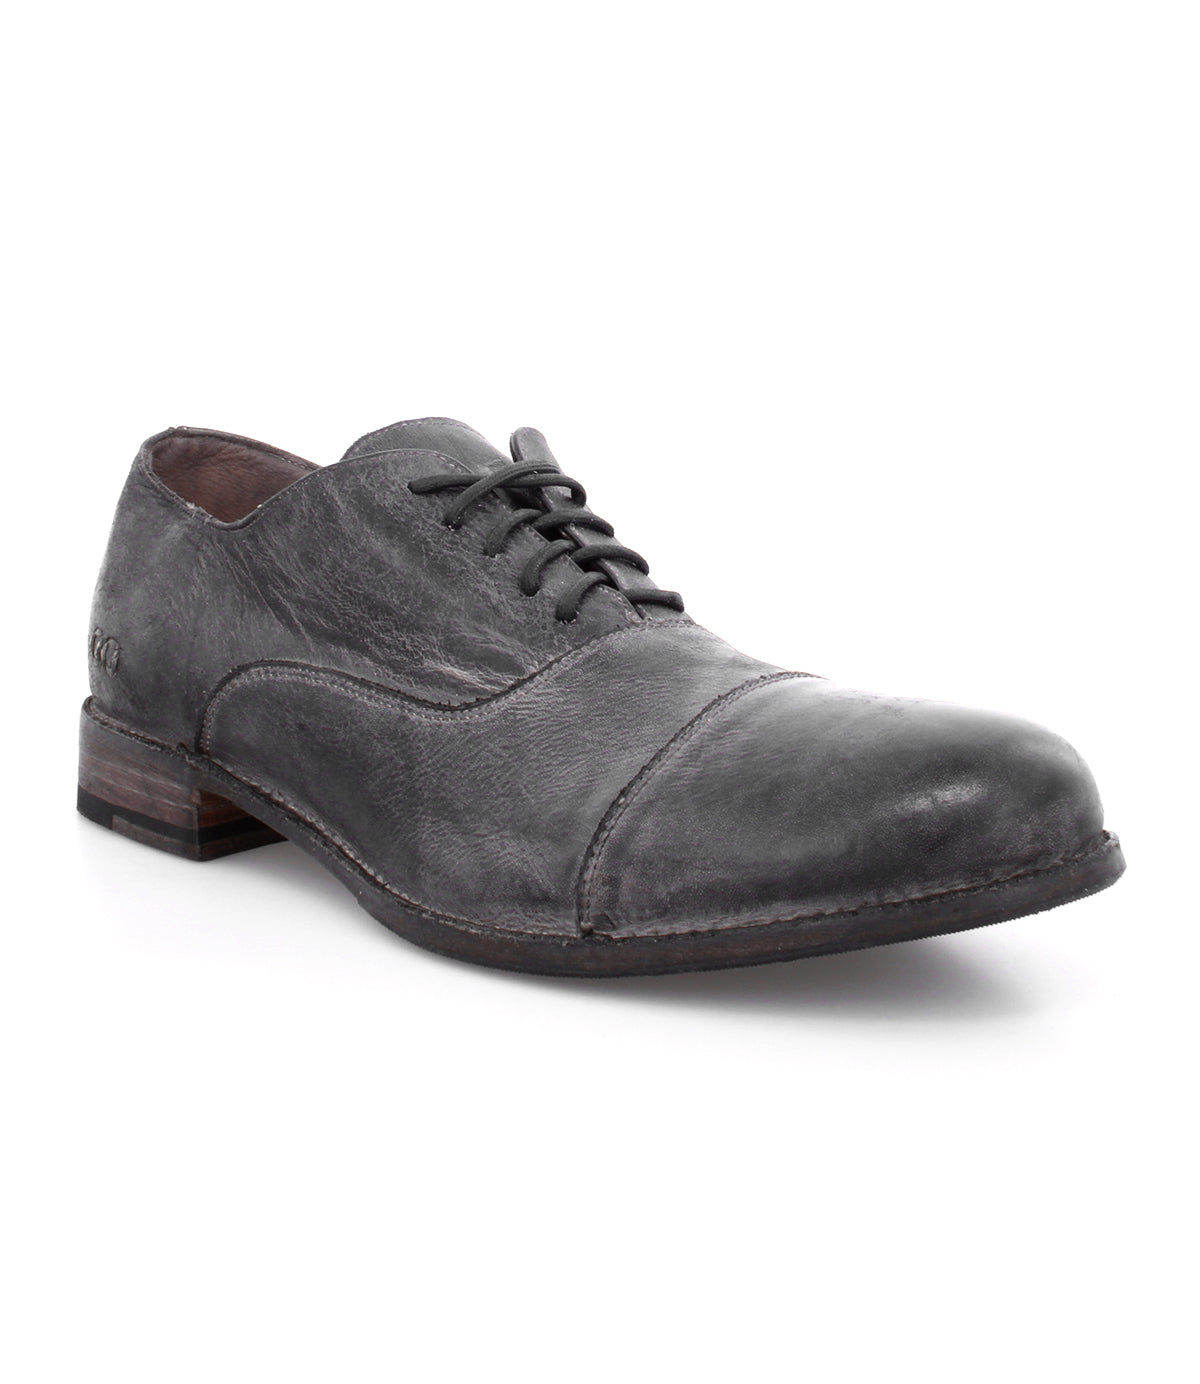 A men's Thorn grey lace up oxford shoe from Bed Stu.